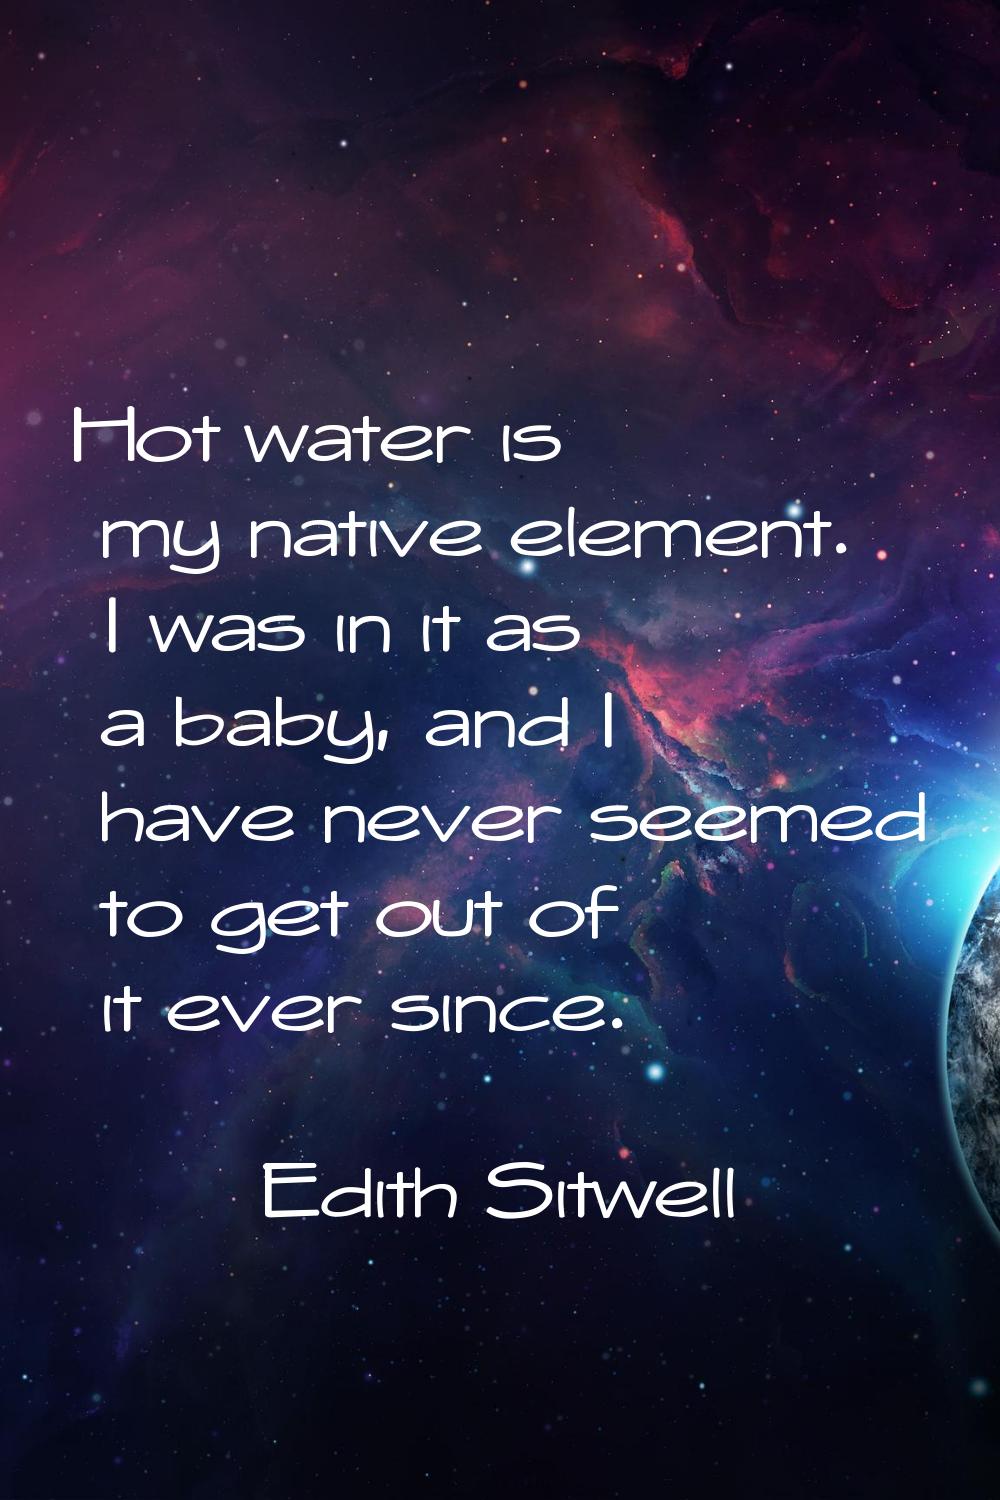 Hot water is my native element. I was in it as a baby, and I have never seemed to get out of it eve